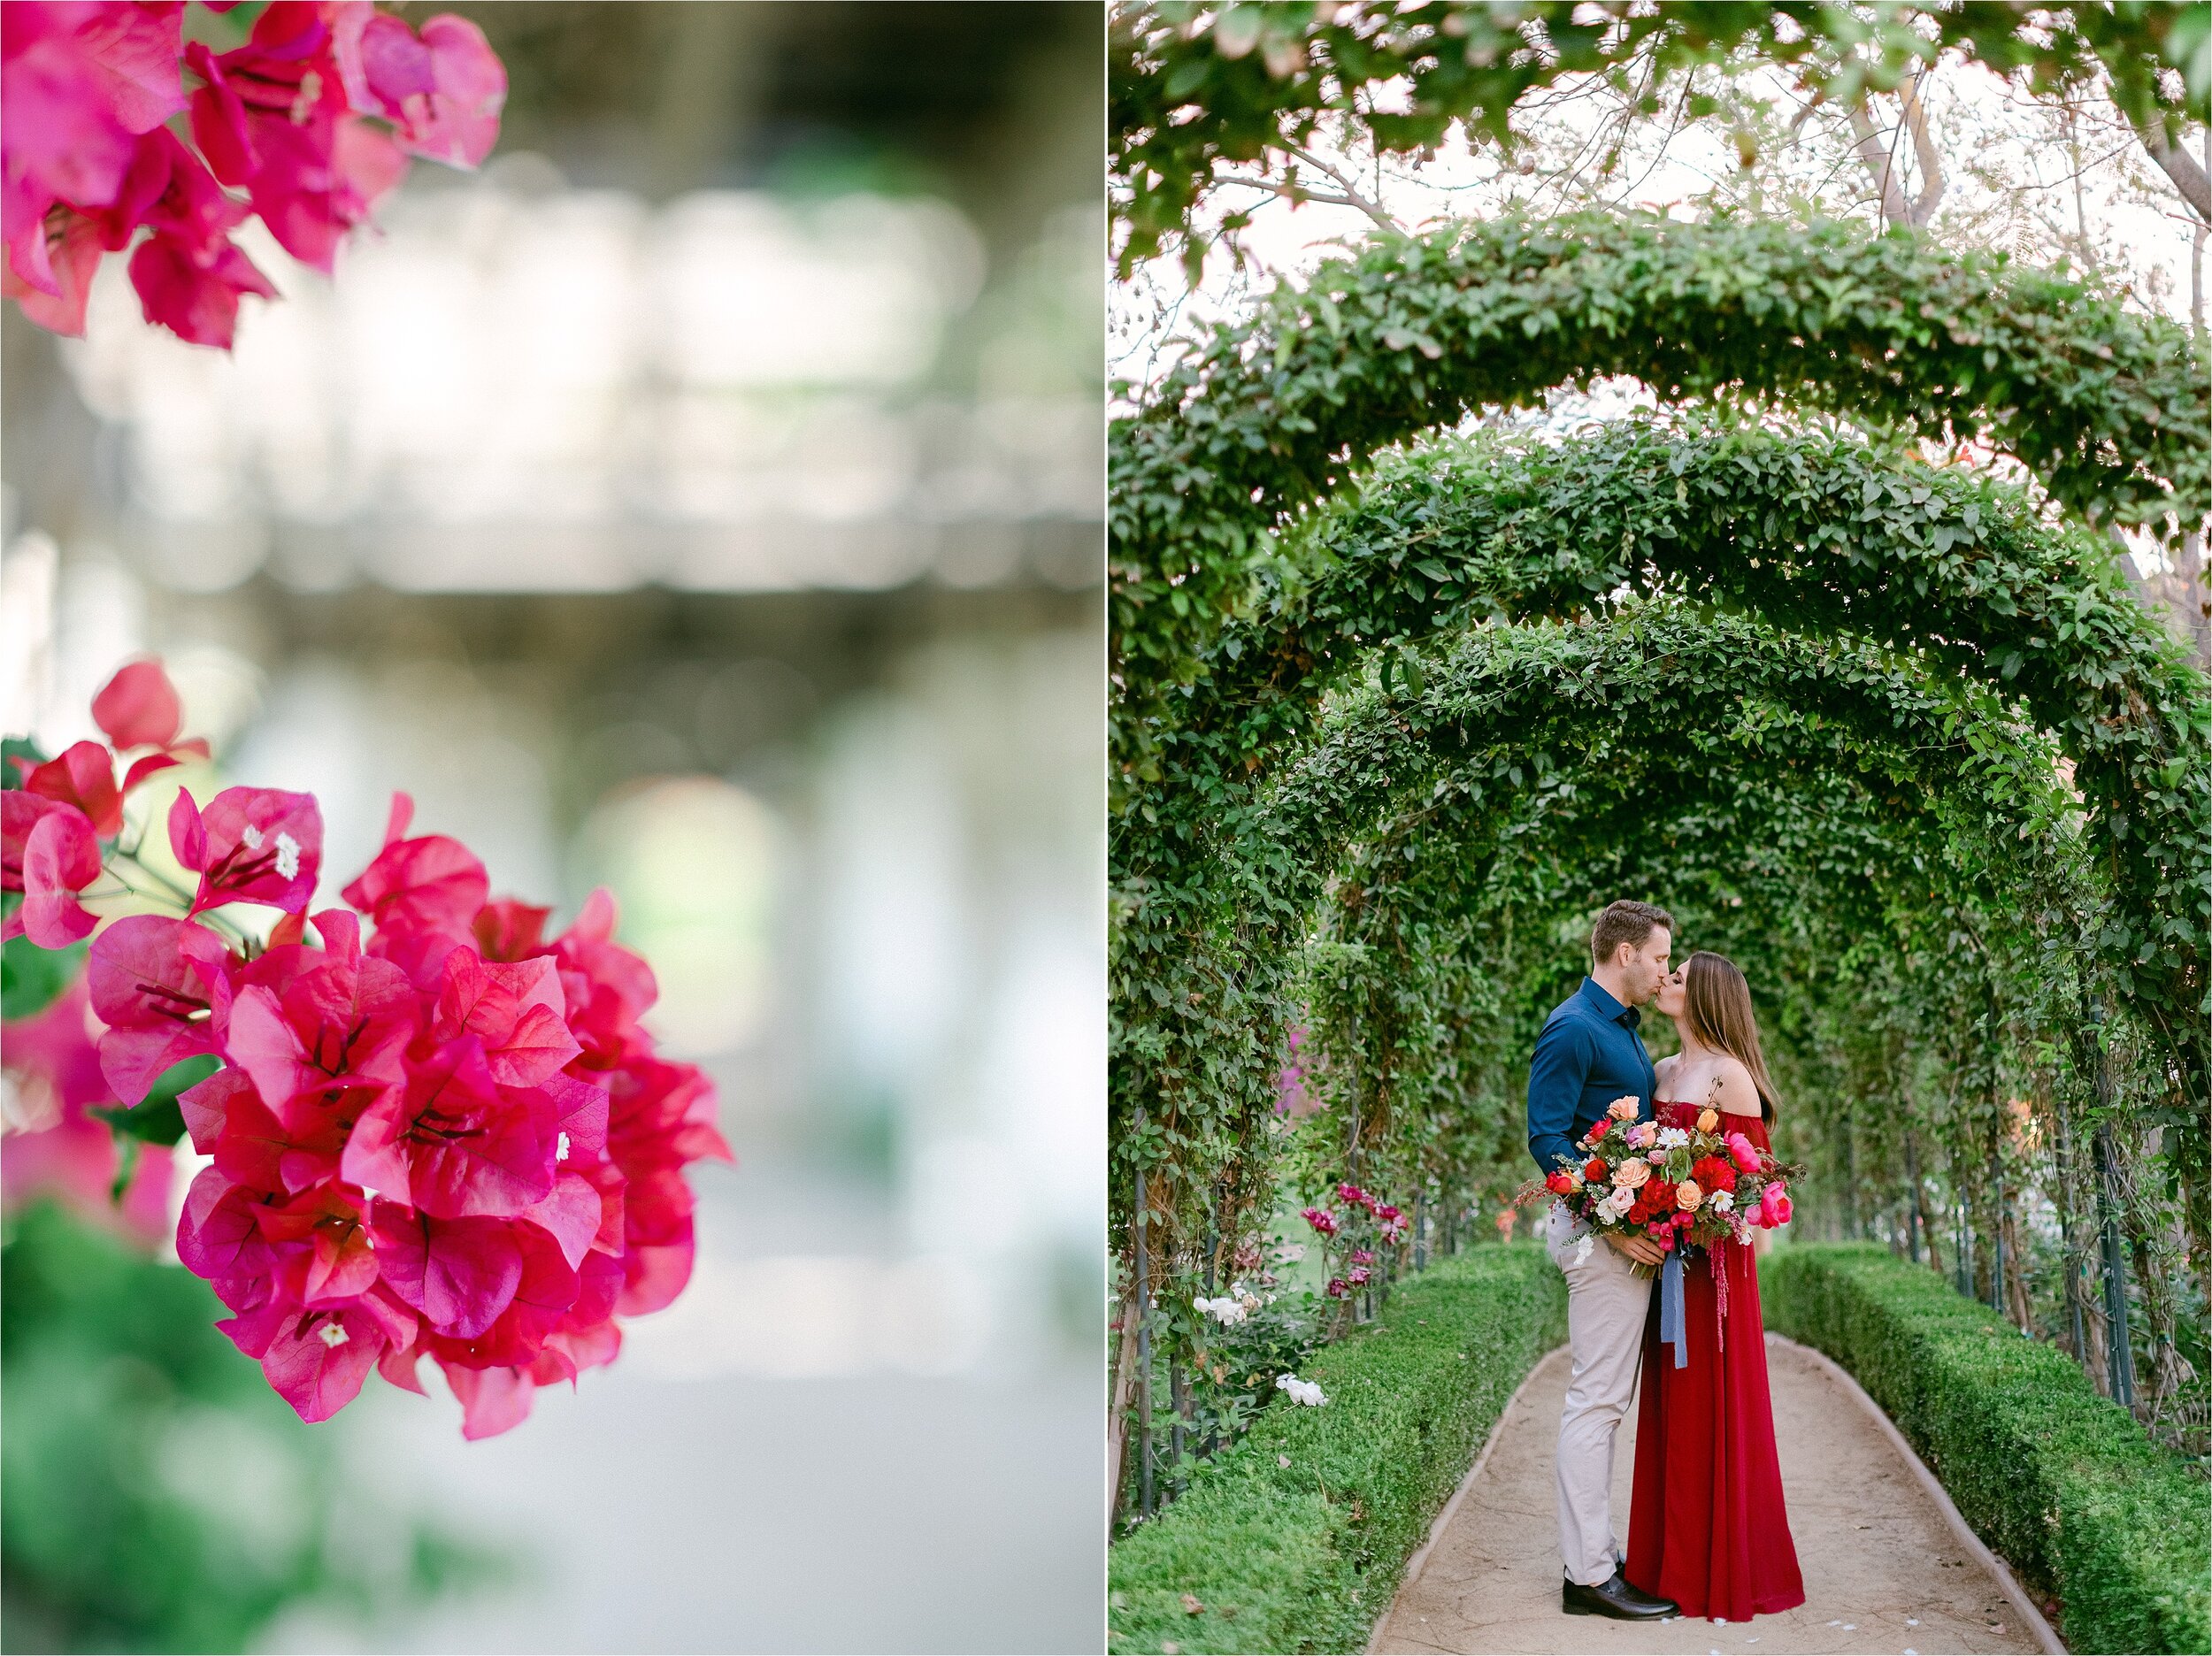 Fiances kiss under vibrant green archway.  He is wearing a midnight blue button down shirt with khaki pants while she is wearing a long, off shoulder, wine colored dress and is holding a large, vibrant bouquet. 